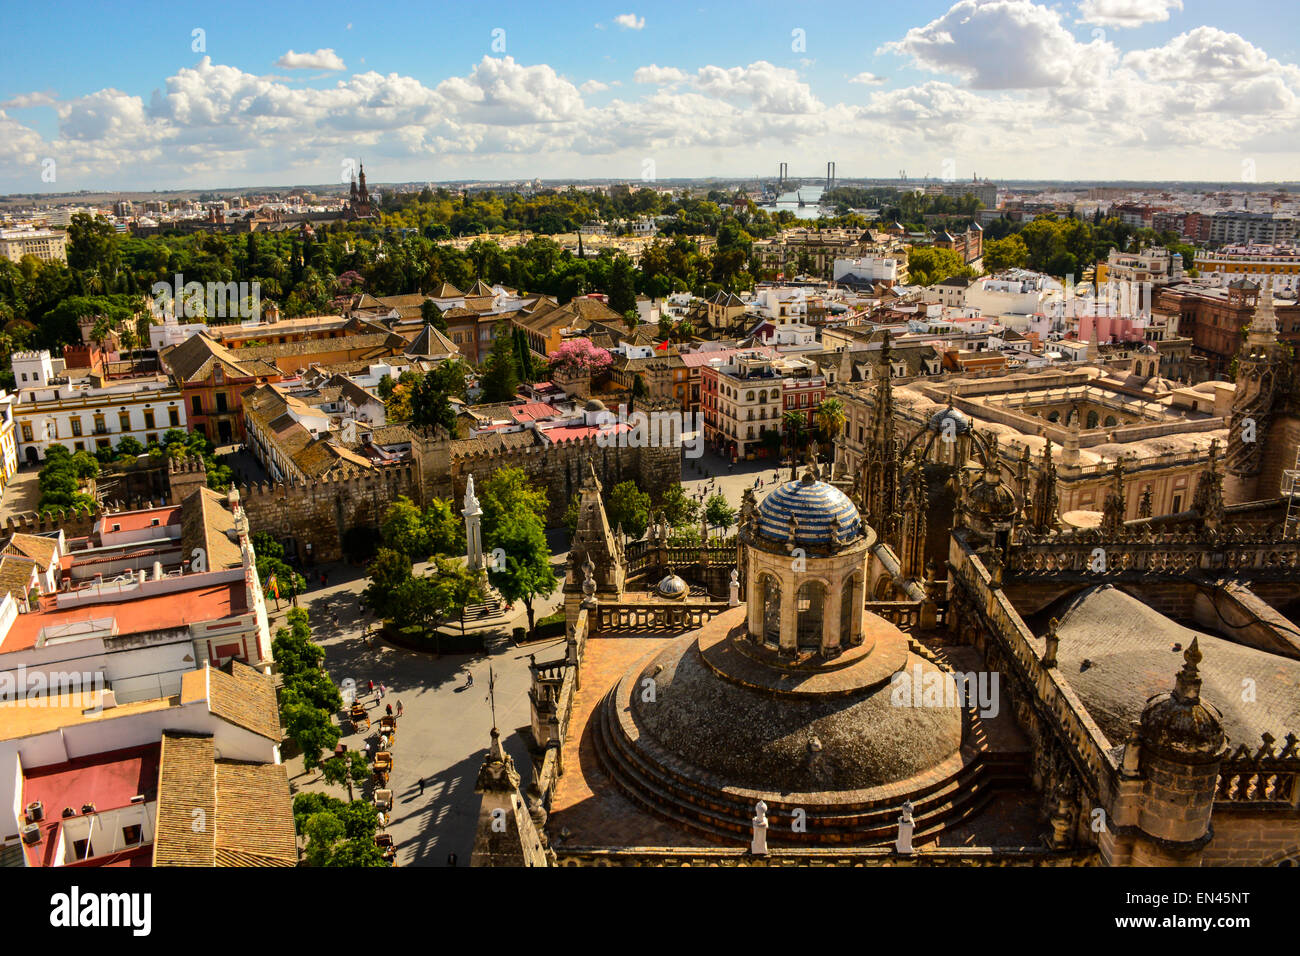 Panoramic view of the romantic city of Seville, Spain. Stock Photo